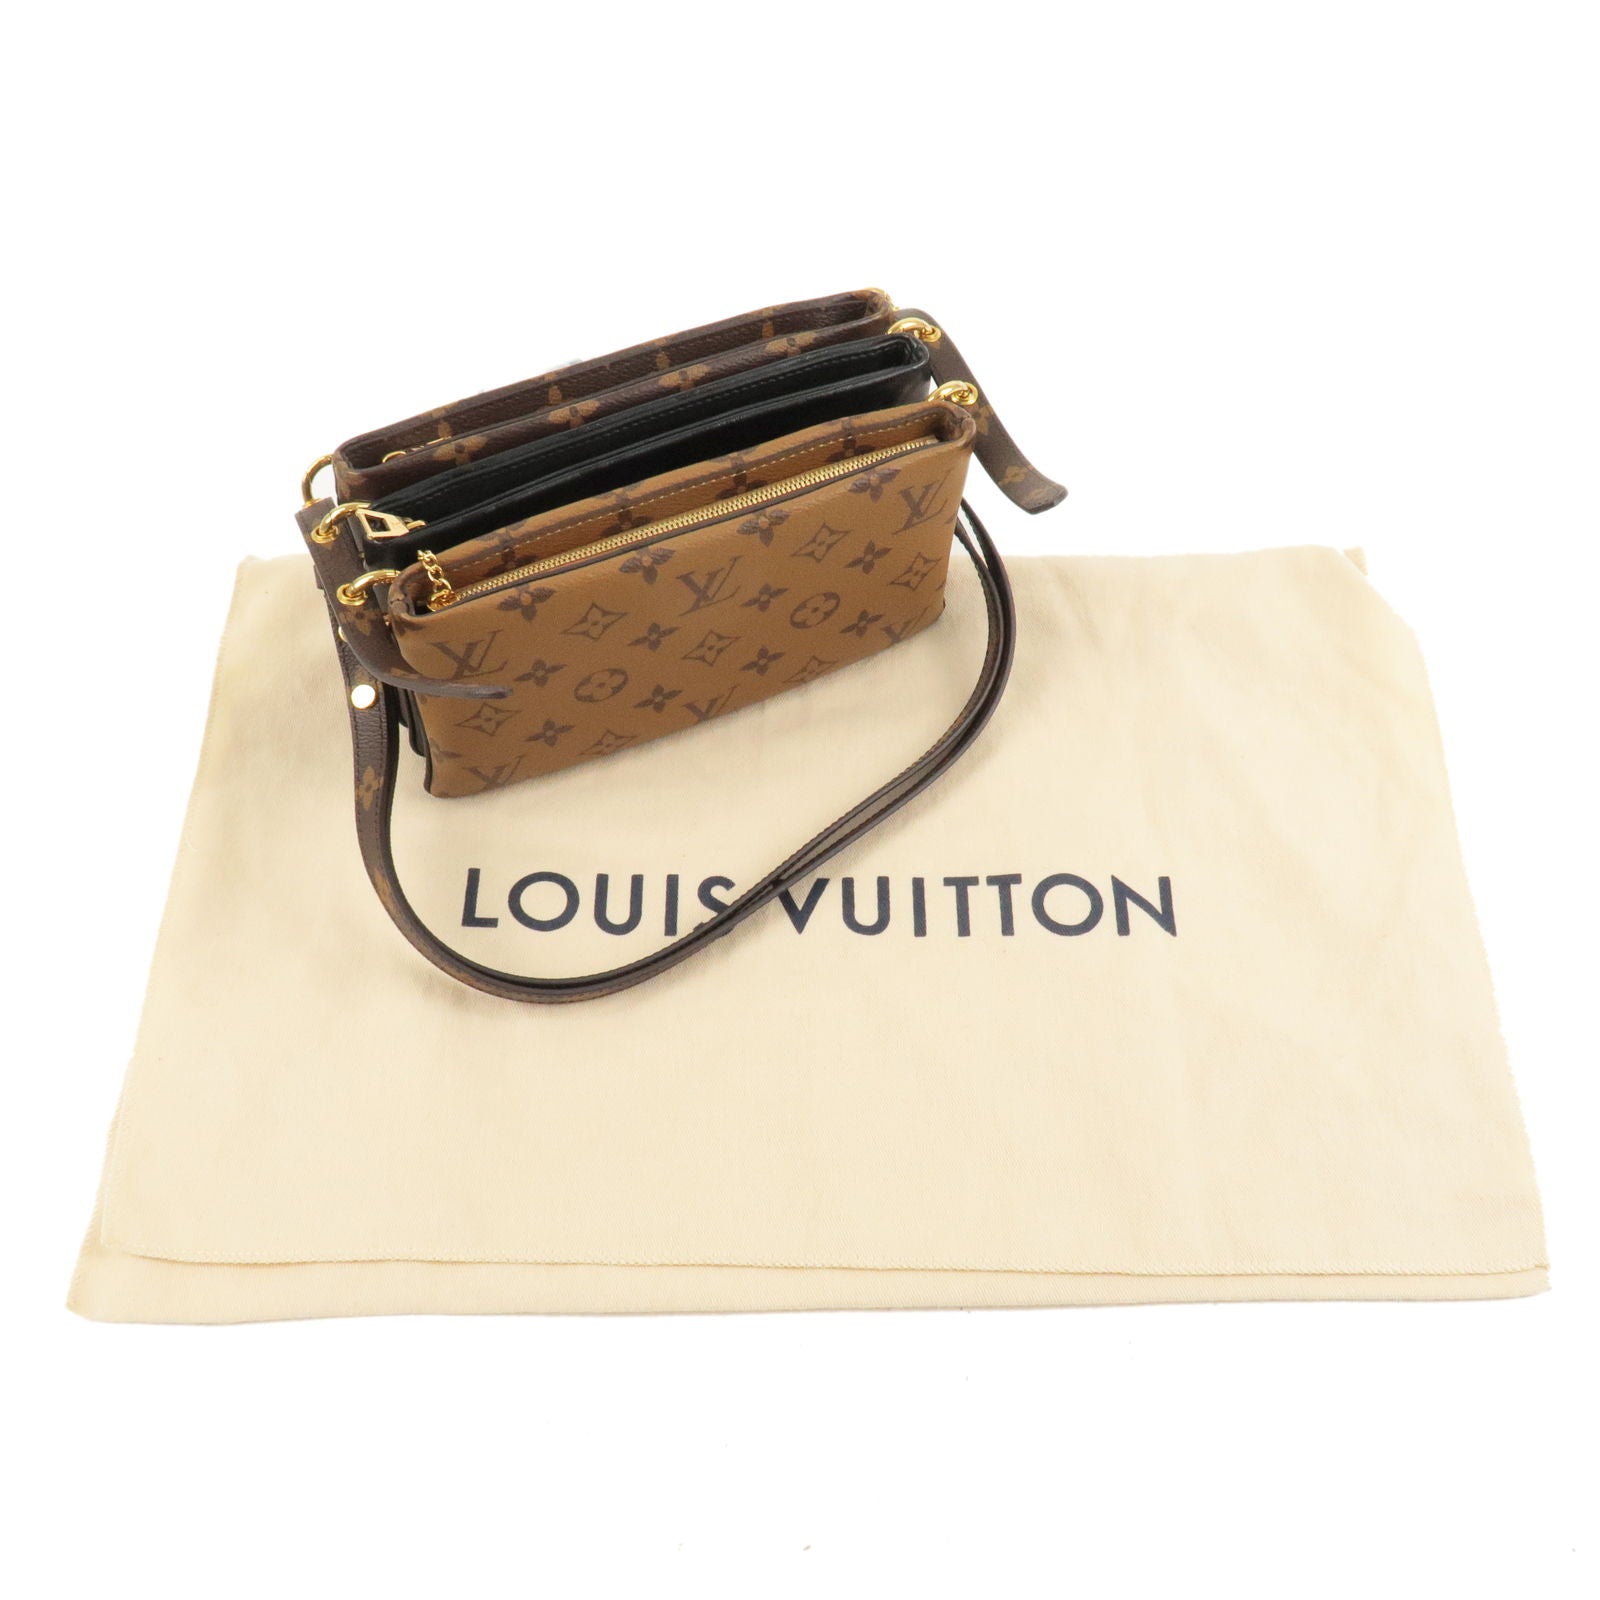 The Louis Vuitton Bag You Should Be Talking About: The LV3 Pouch